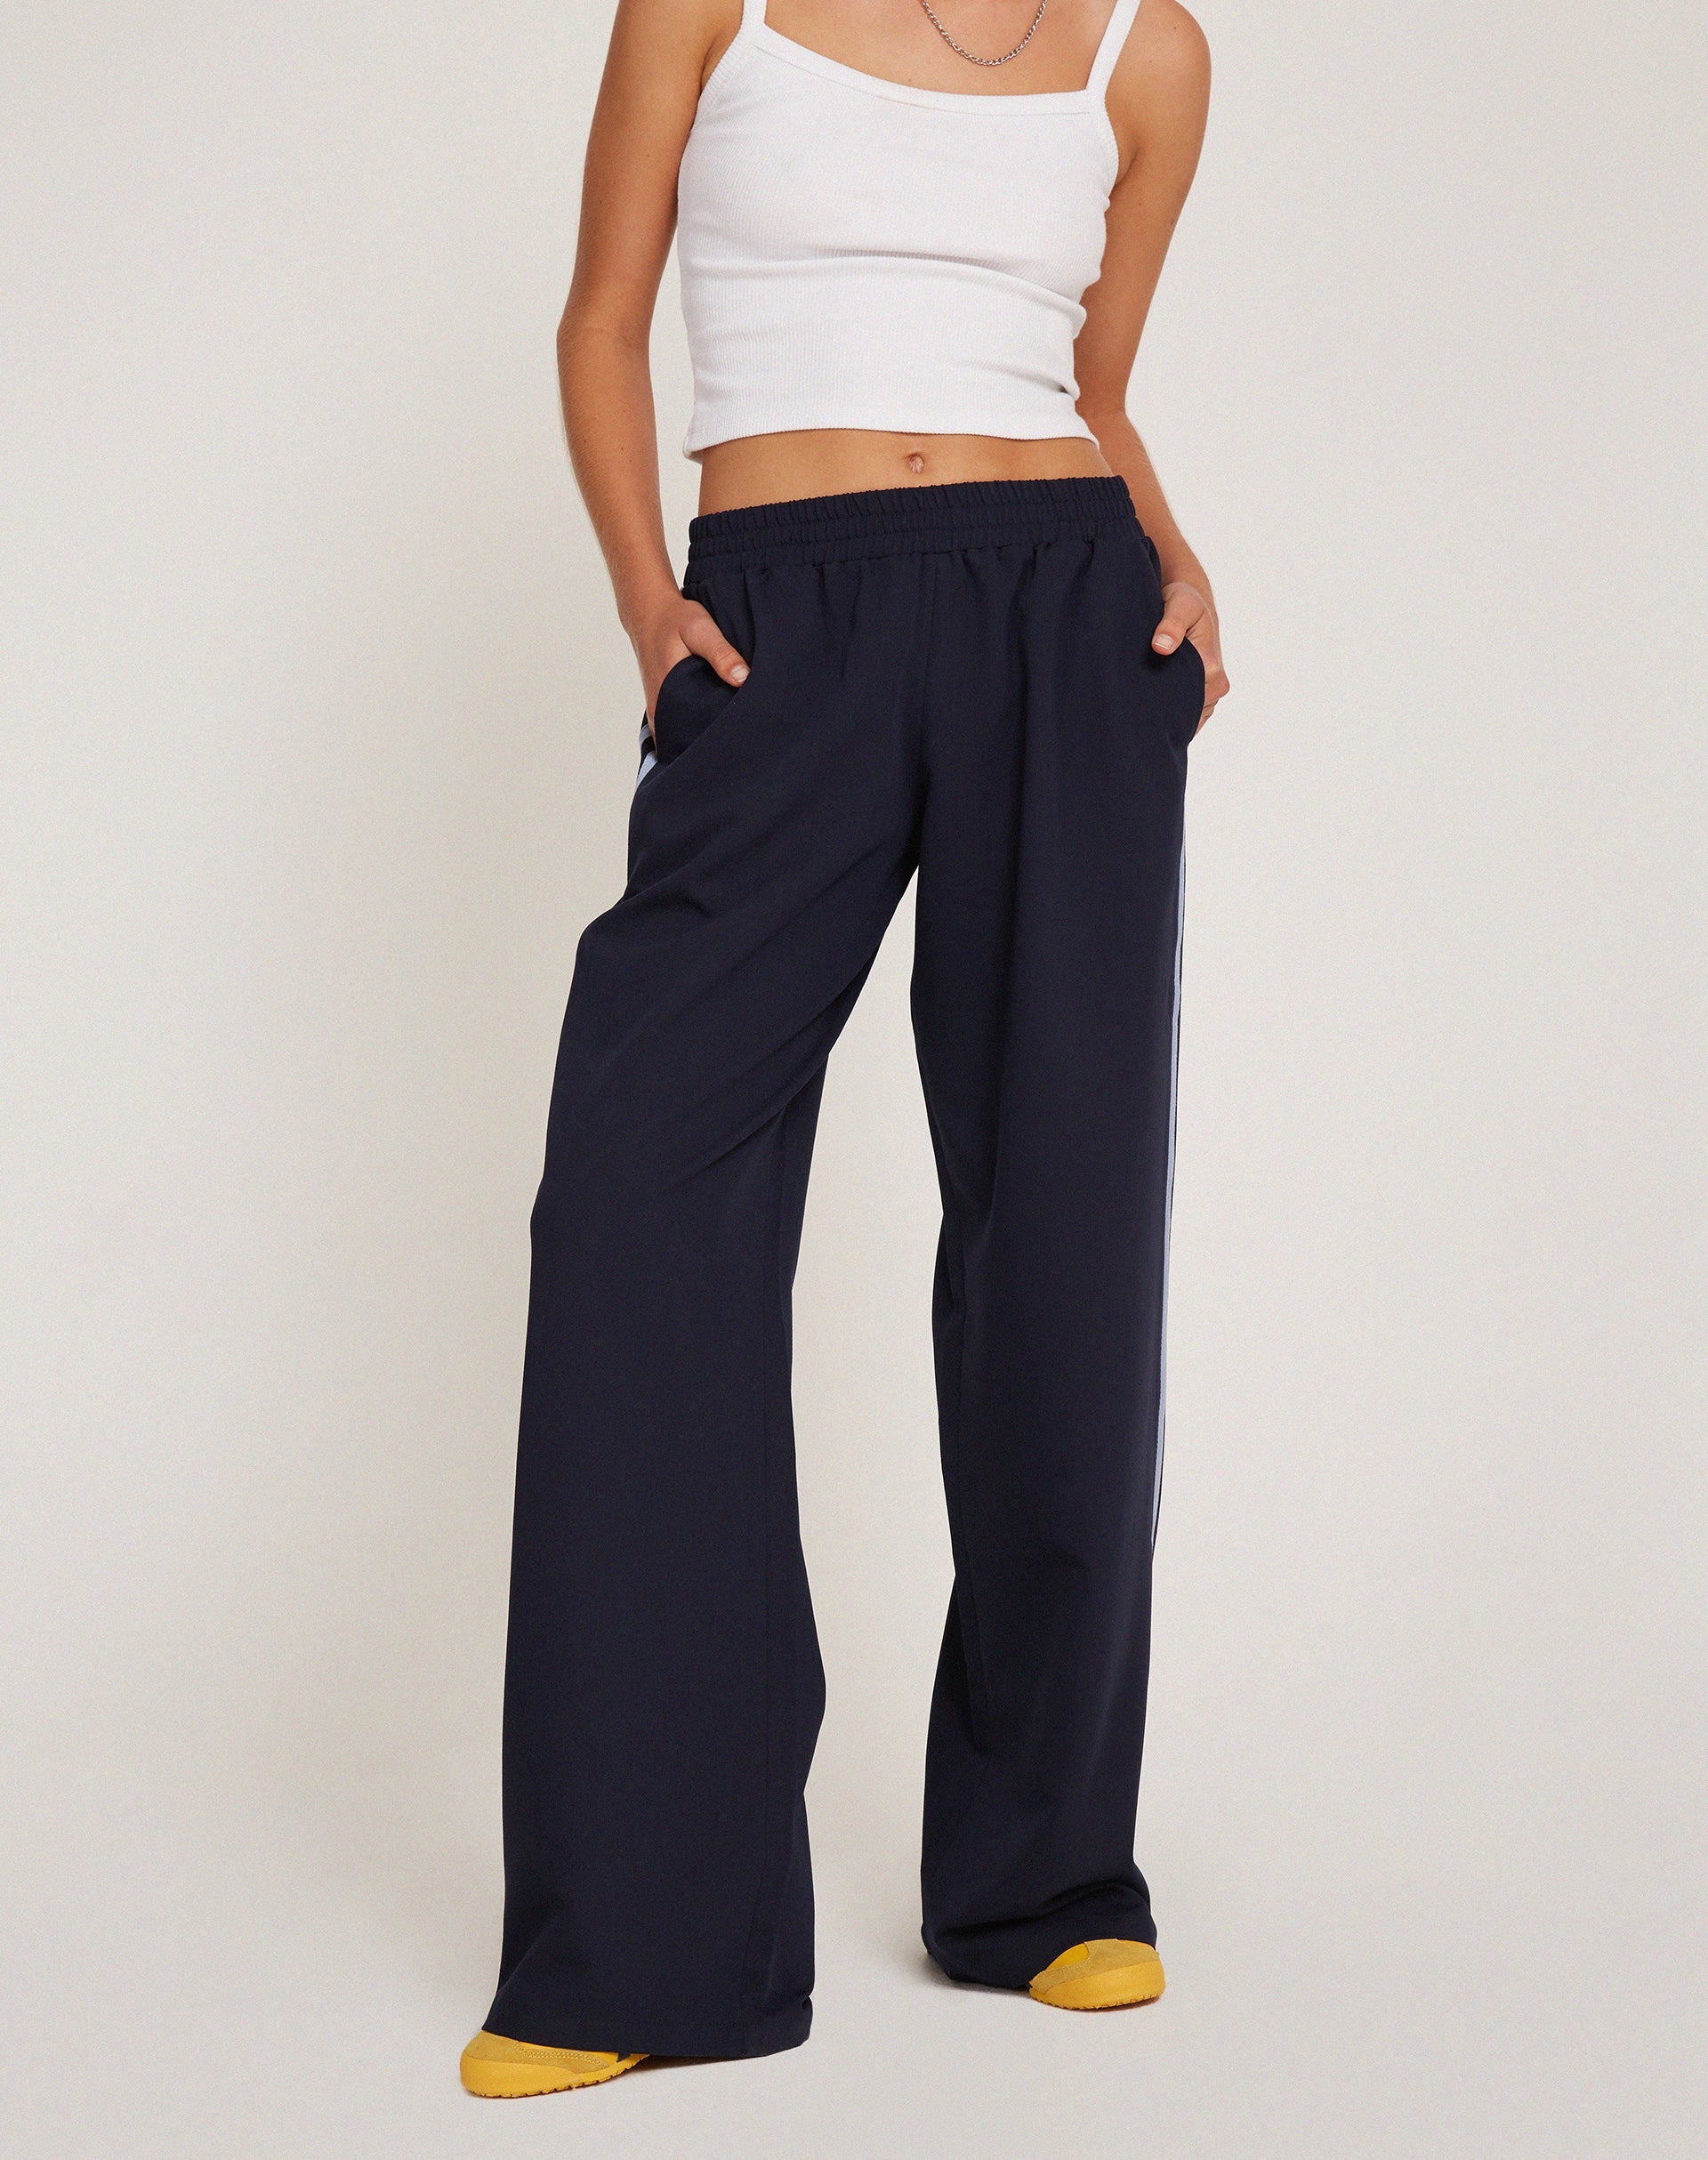 Warehouse wide leg trousers with side stripe in navy | ASOS